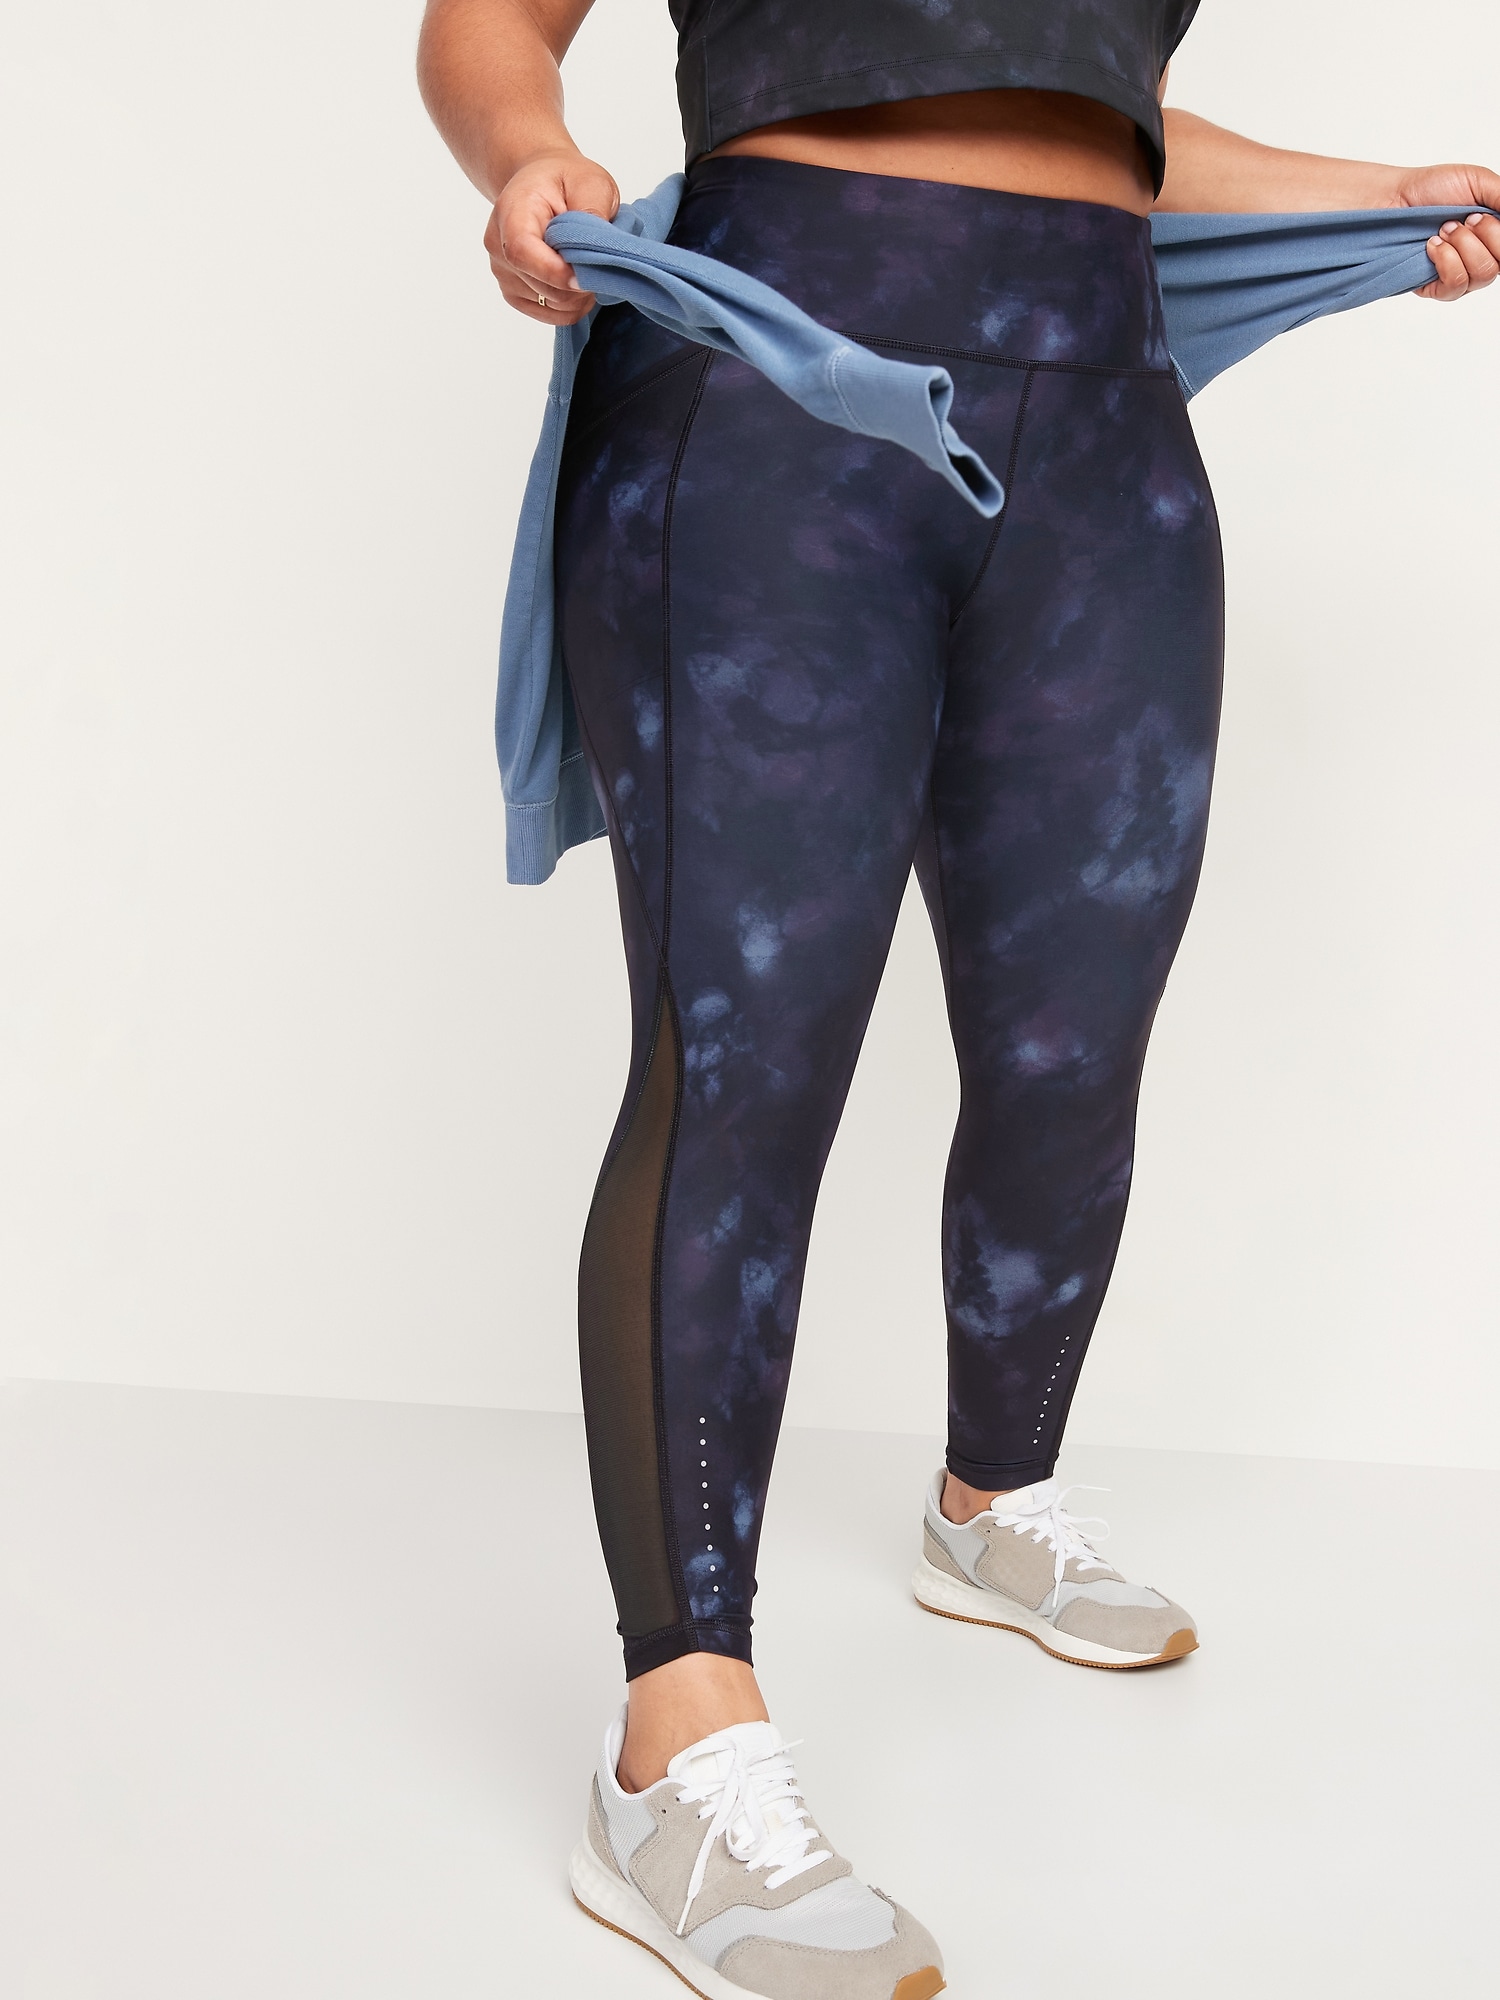 Old Navy Is Having a Major Sale on Its Most Popular Leggings